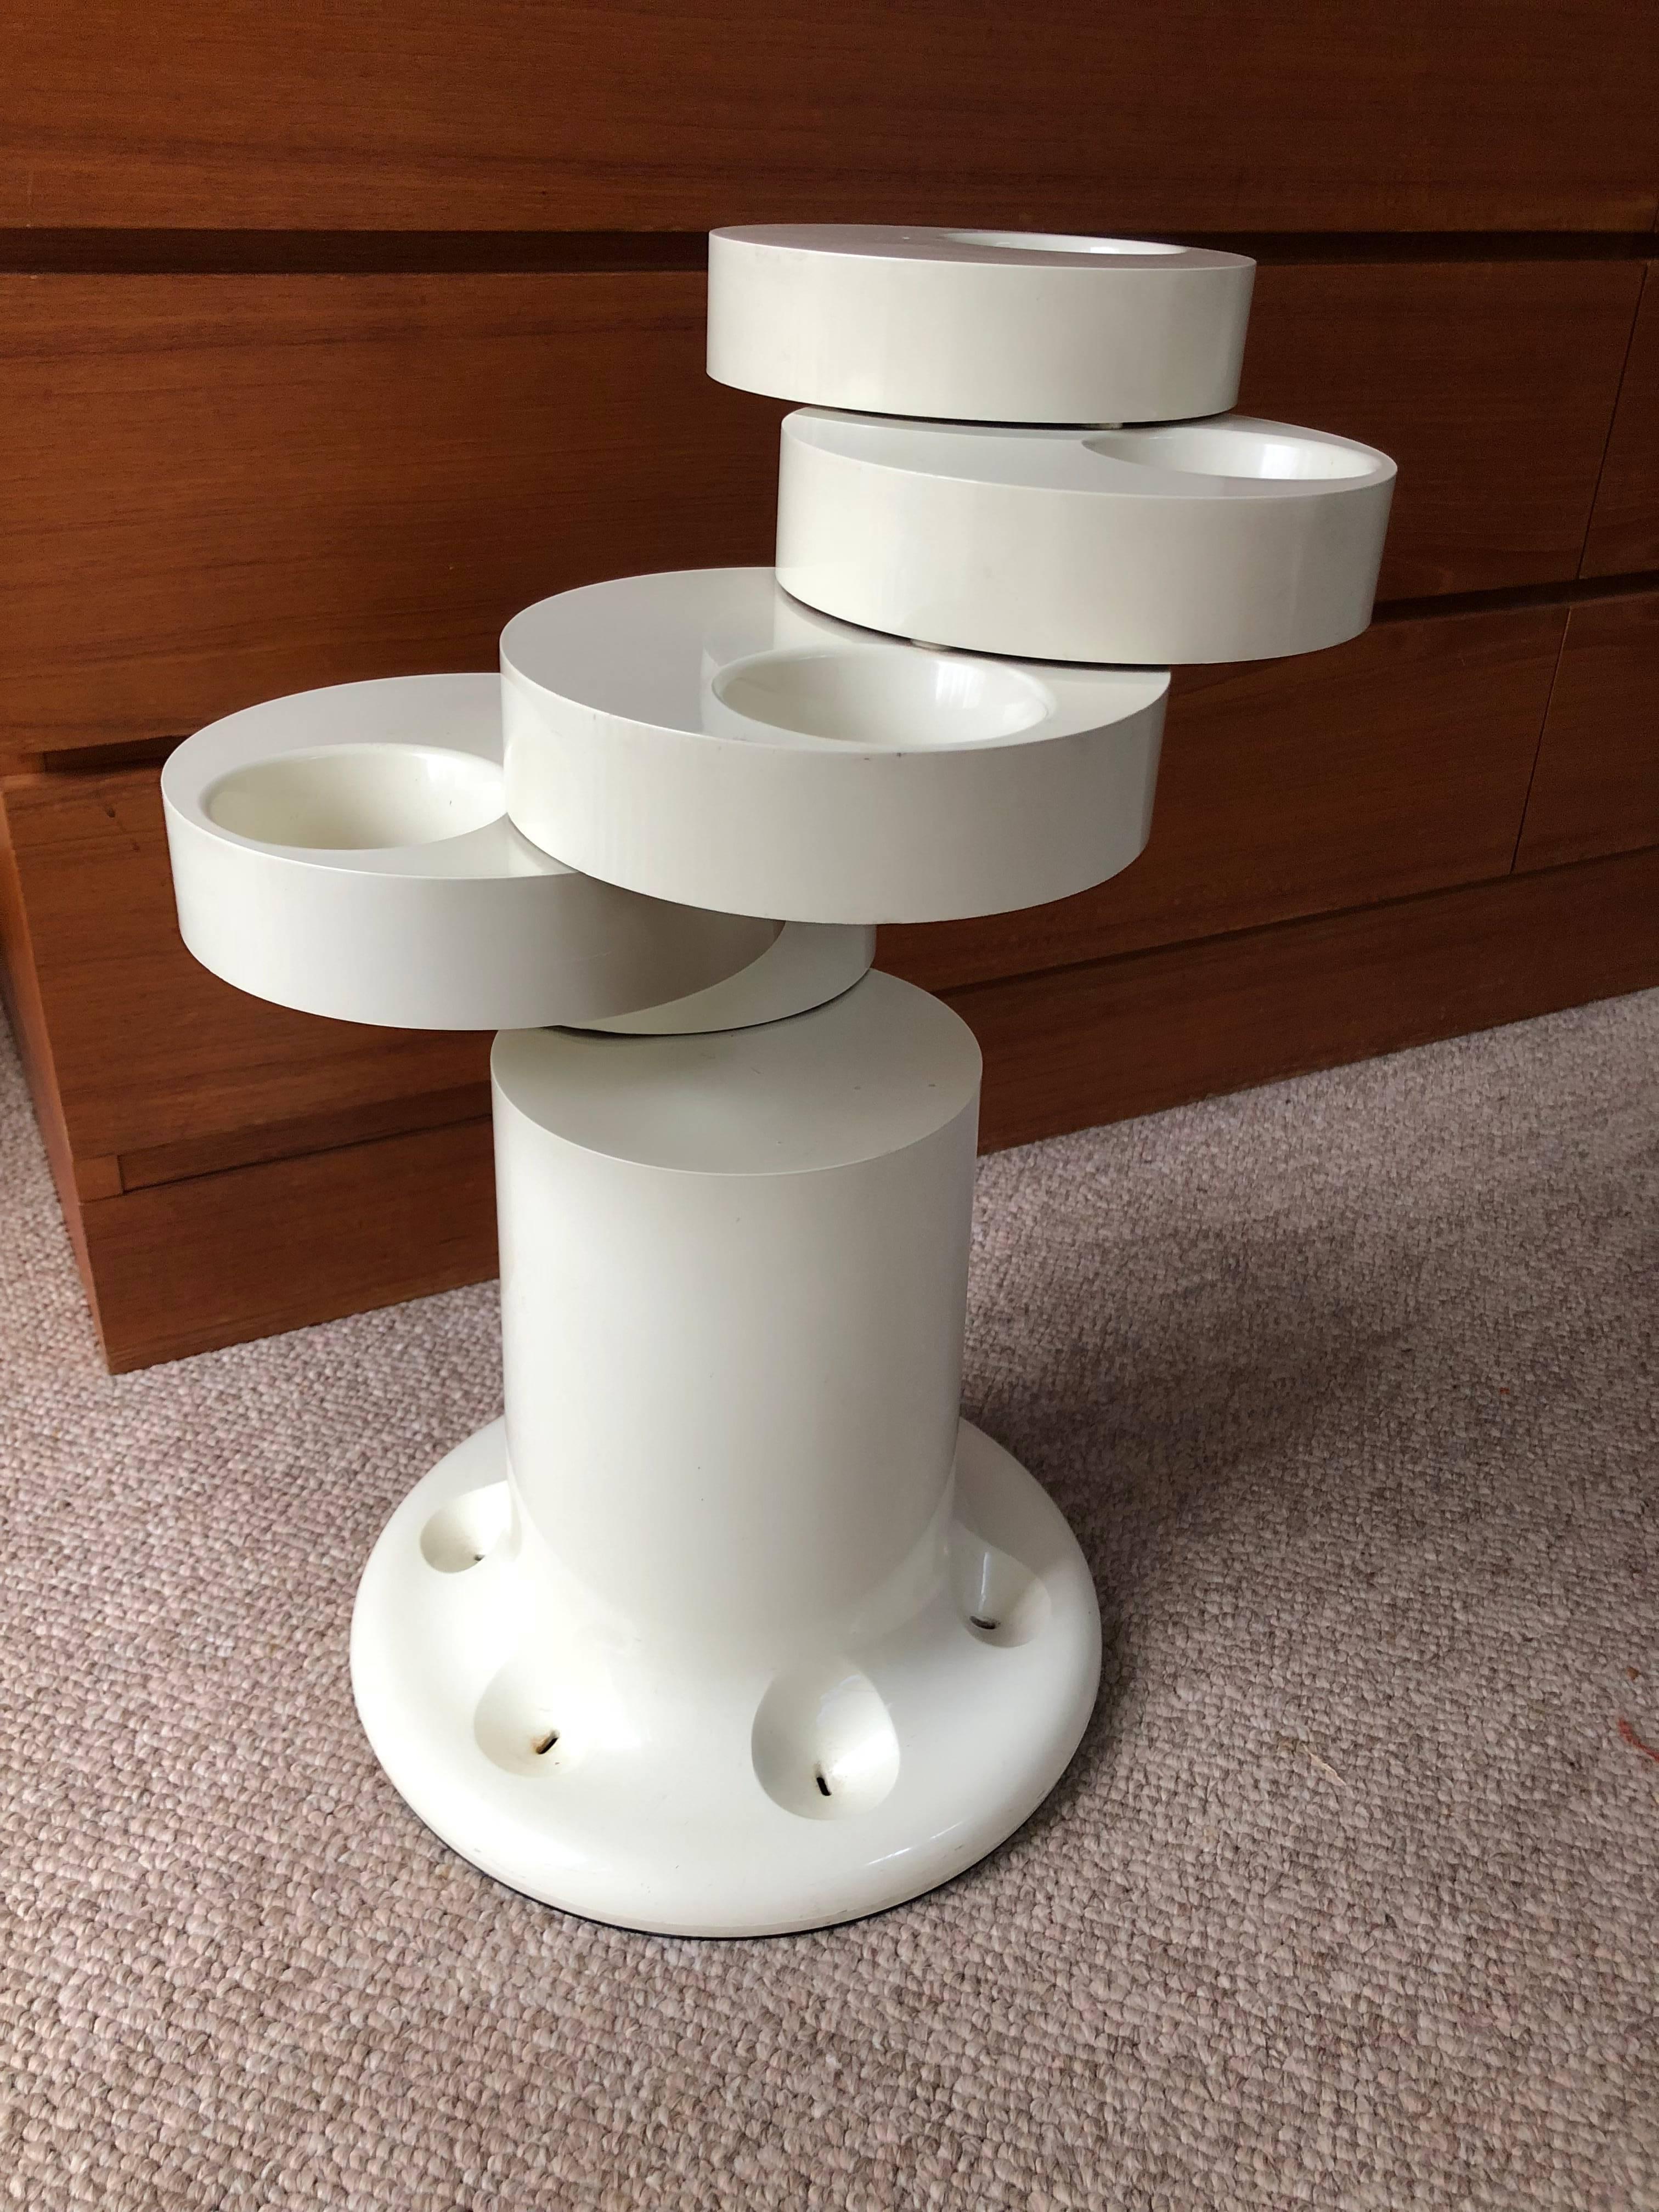 Pluvium umbrella stand by Giancarlo Piretti for Anonima Castelli, circa 1970. Hinged plastic rings on the stand open individually to accommodate up to six umbrellas. Molded signature to underside.